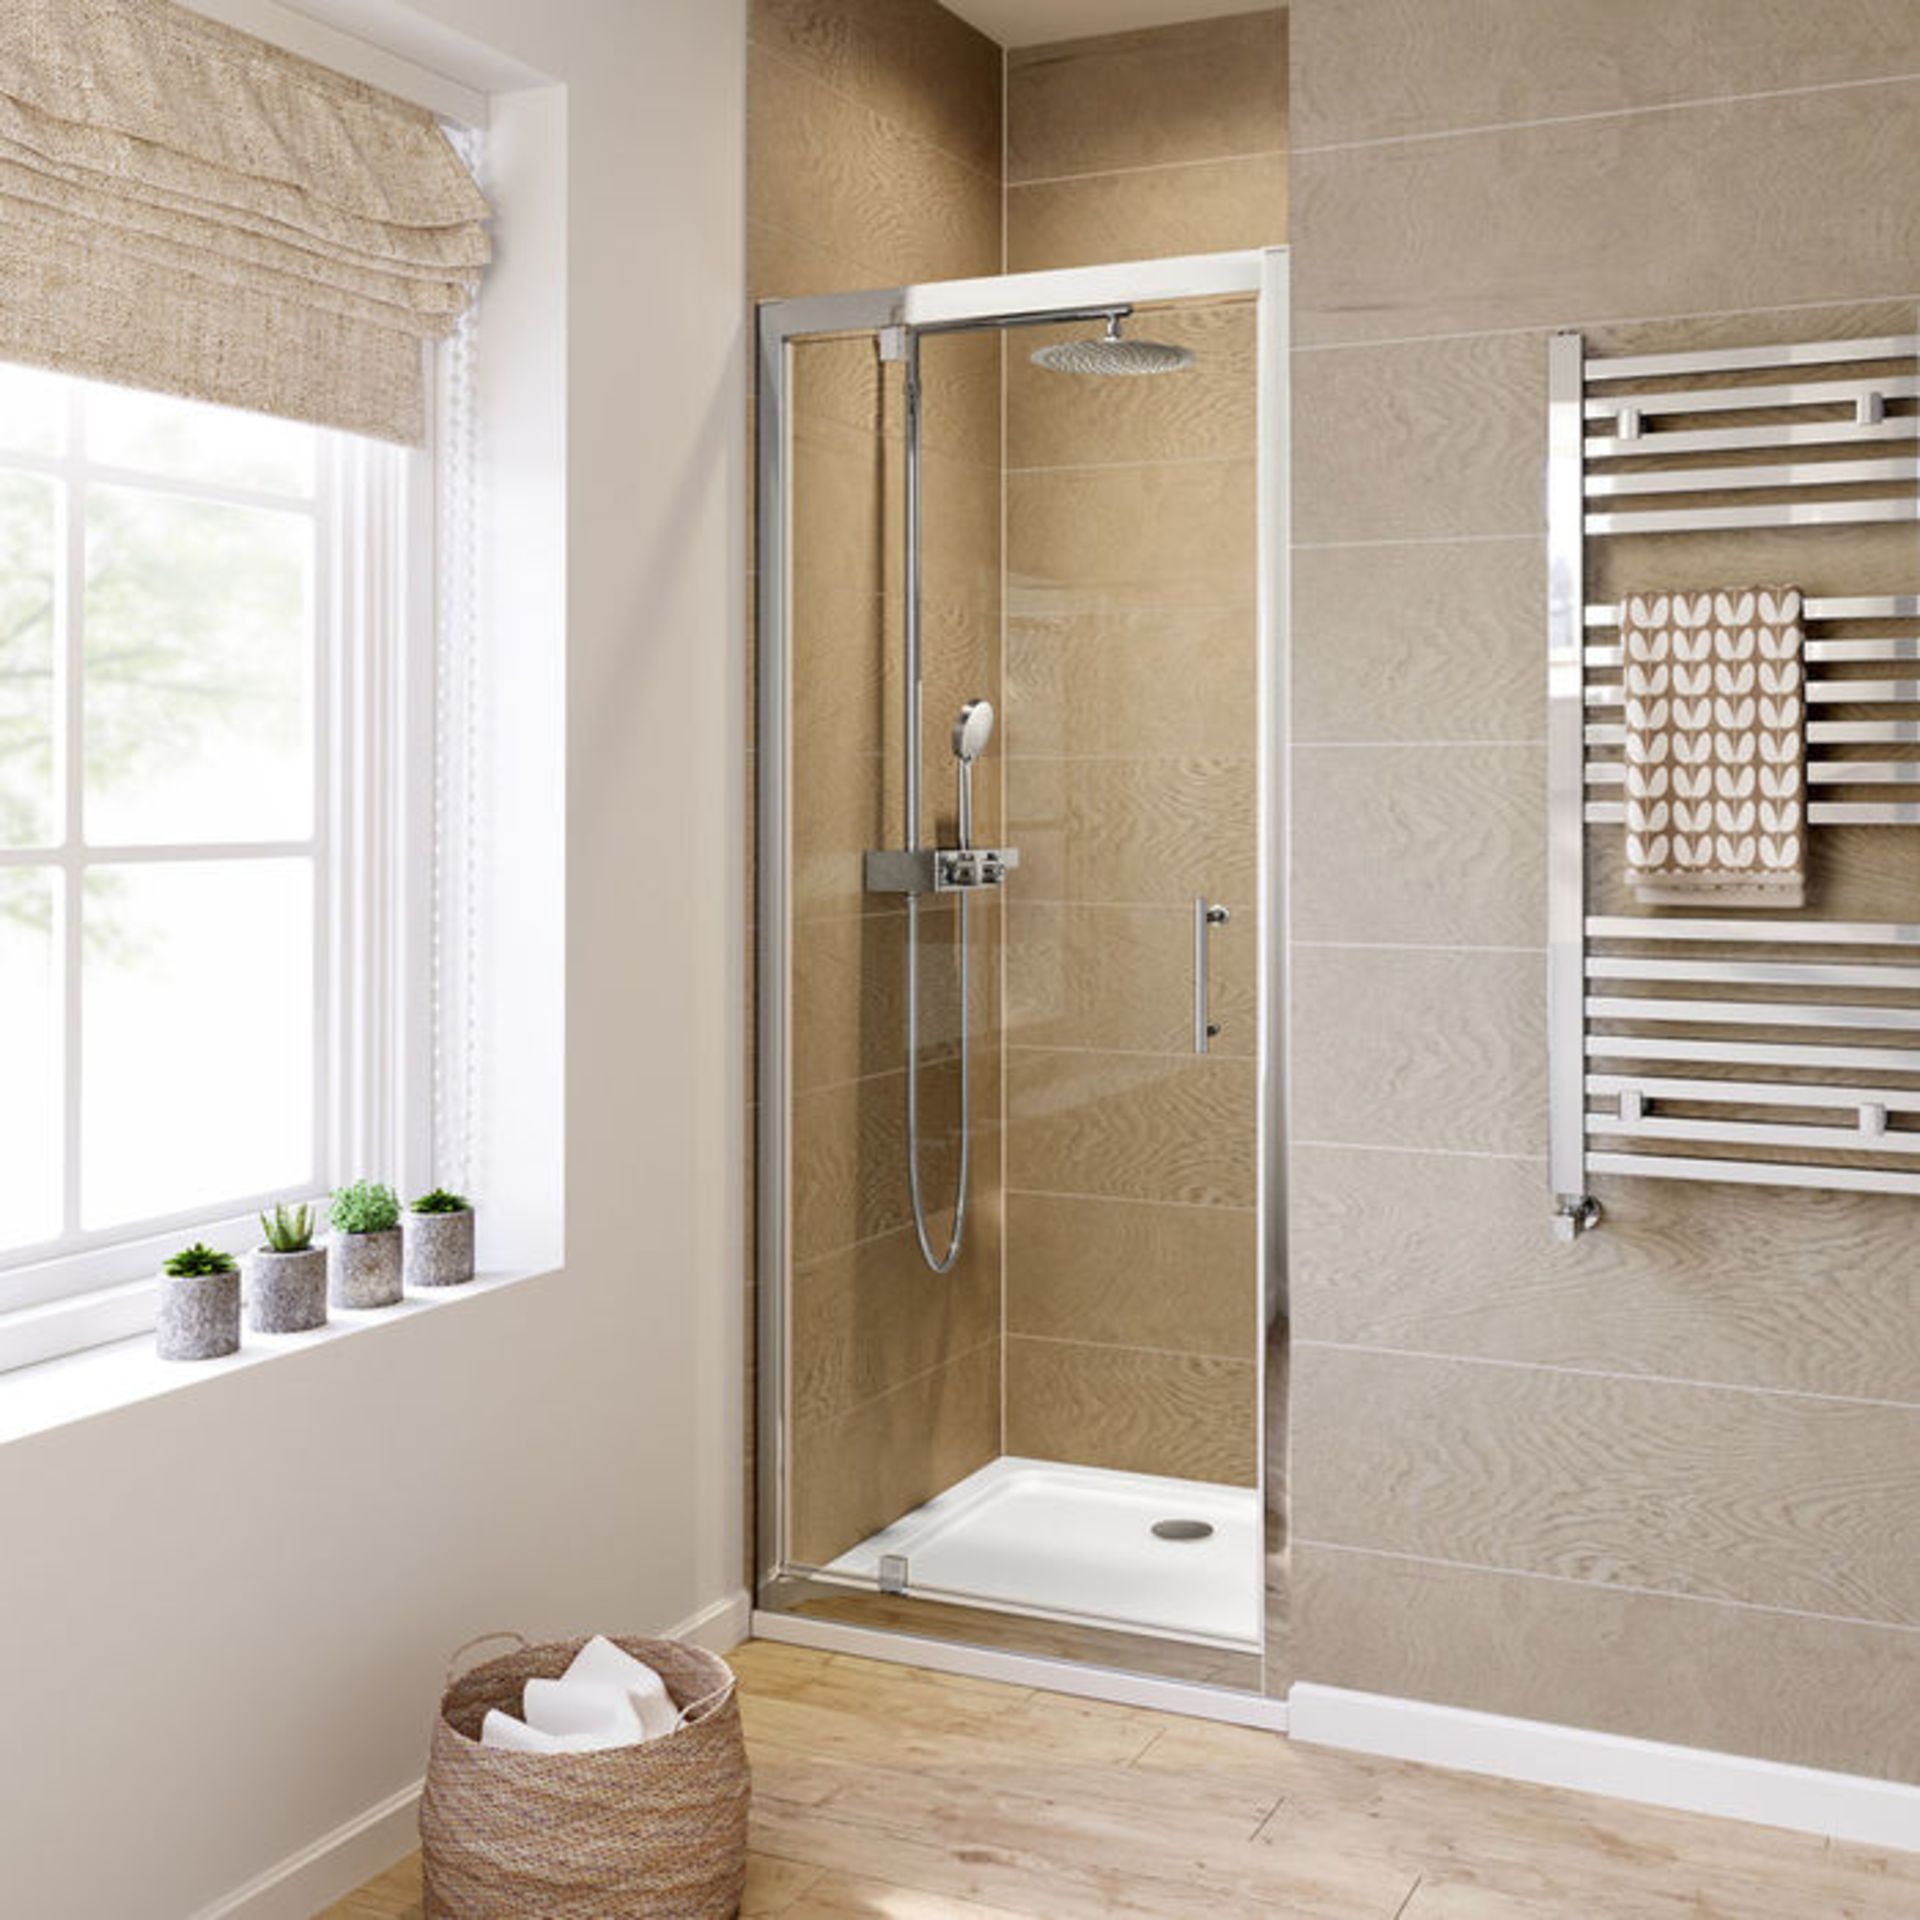 Brand New Twyfords 700mm - 6mm - Premium Pivot Shower Door. RRP £299.99. 8mm Safety Glass Fully wate - Image 3 of 3